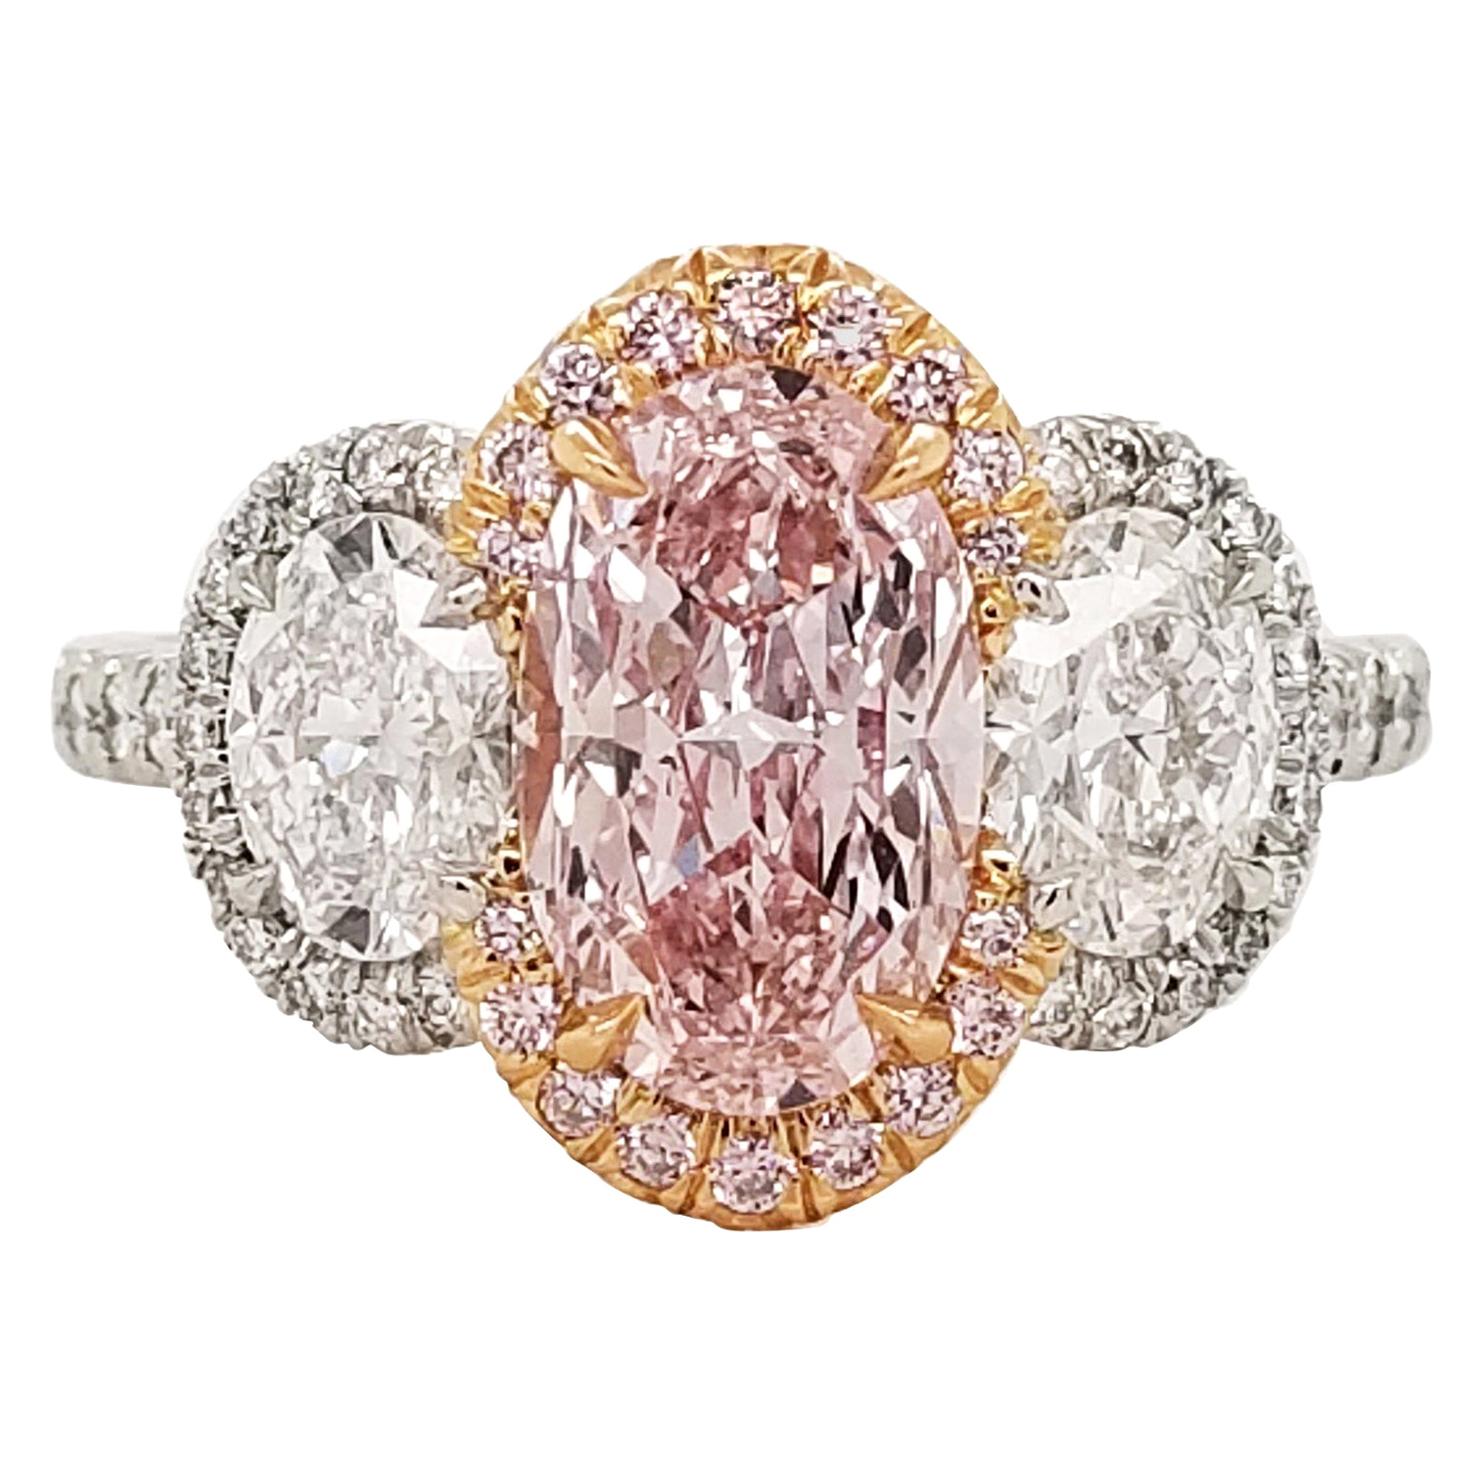 Scarselli 1.50 Carat Fancy Pink Oval Diamond Ring in Platinum and 18 Karat Gold